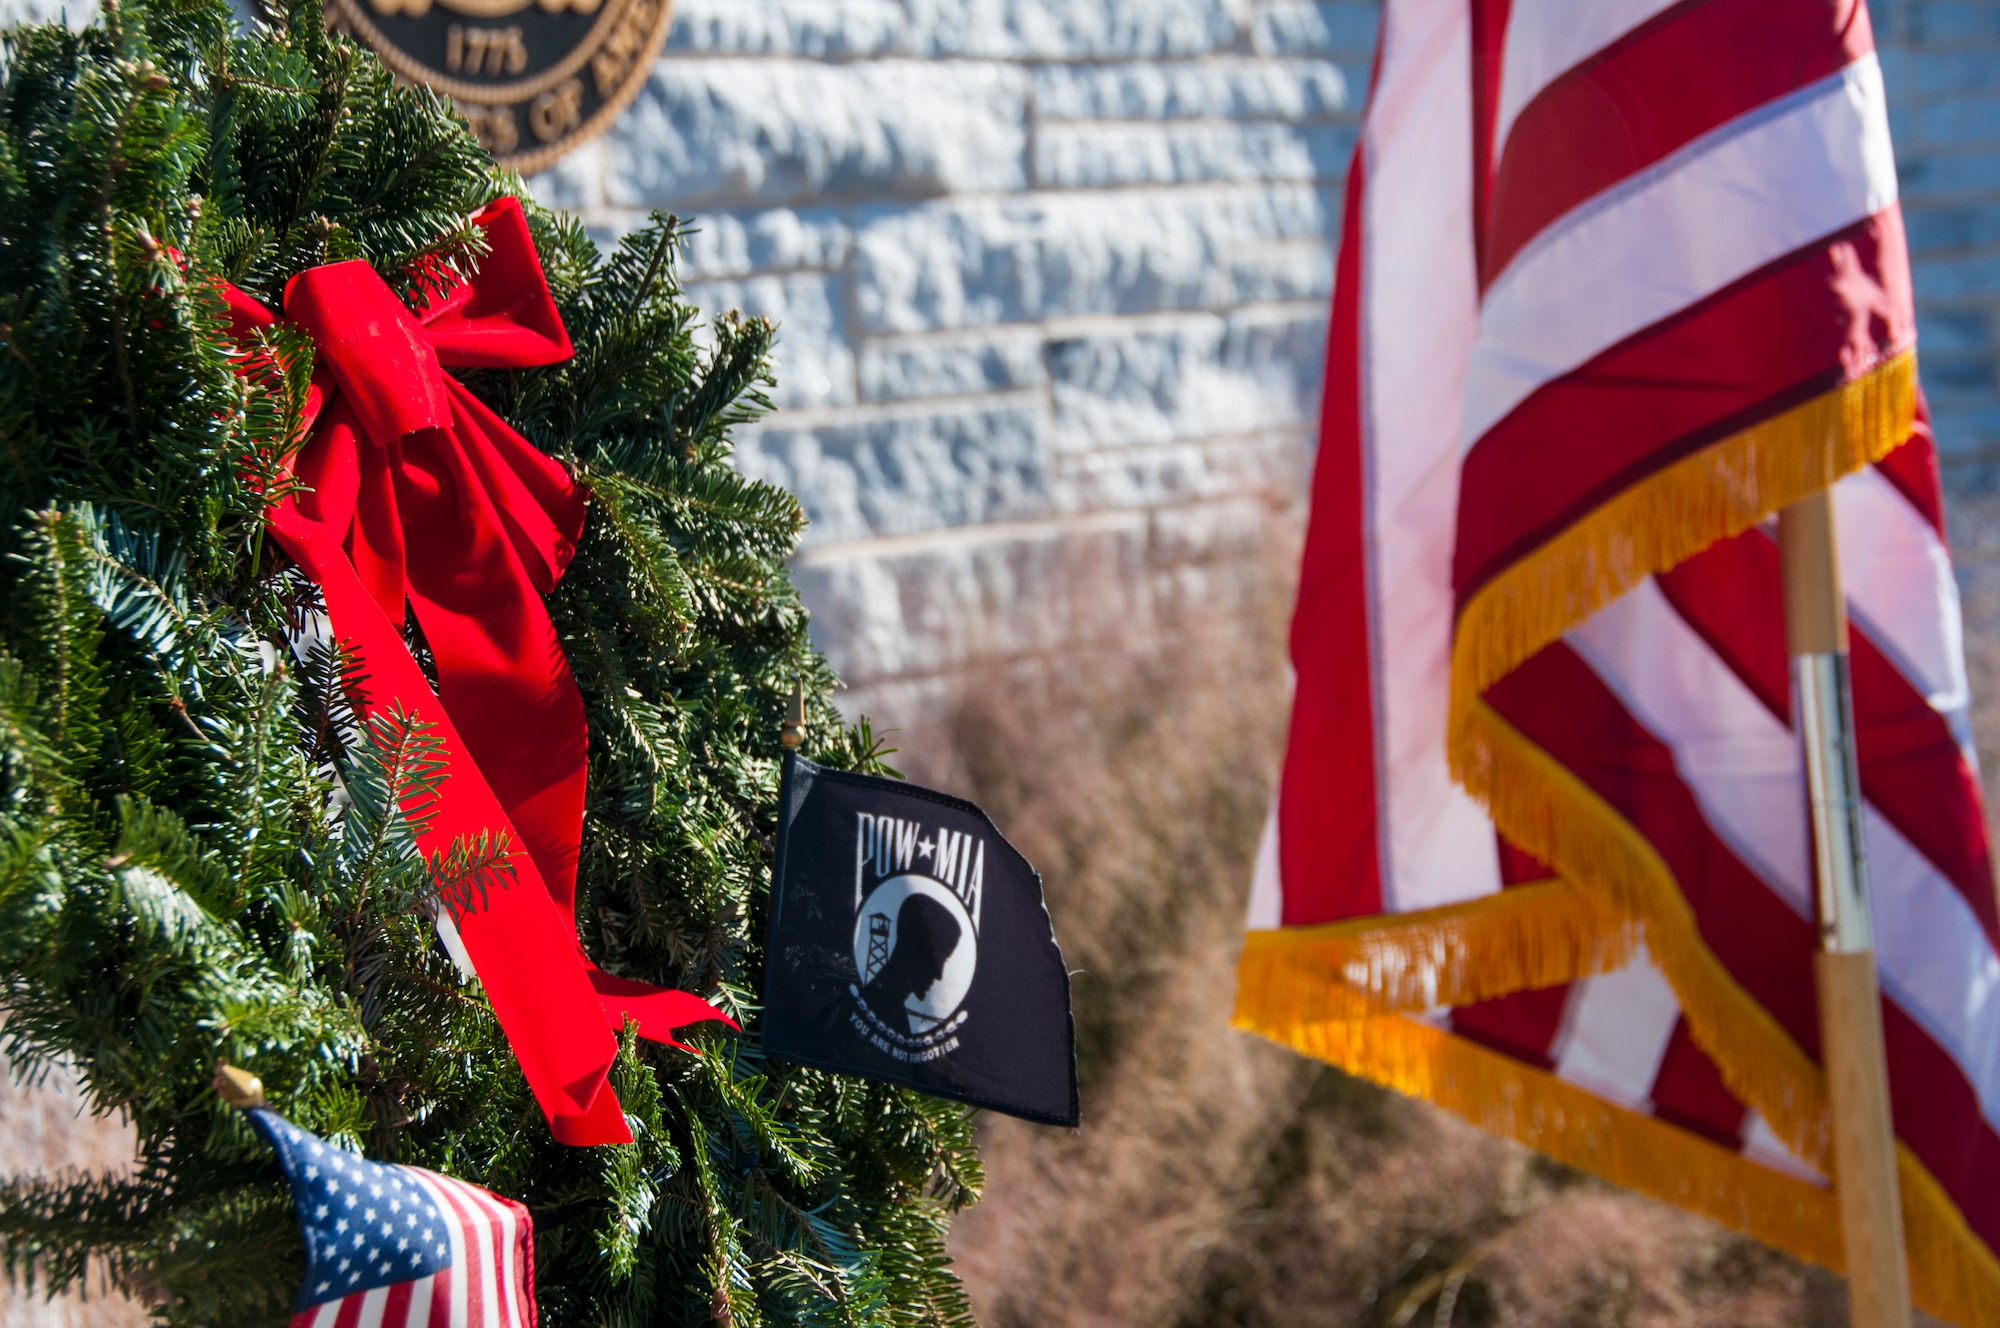 Wreaths lay as a memorial for veterans during the Wreaths Across America ceremony at Georgia National Cemetery in Canton, Ga. Dec. 13, 2014. Wreaths Across America occurs the second Saturday of December every year. (U.S. Air Force photo/Senior Airman Daniel Phelps)